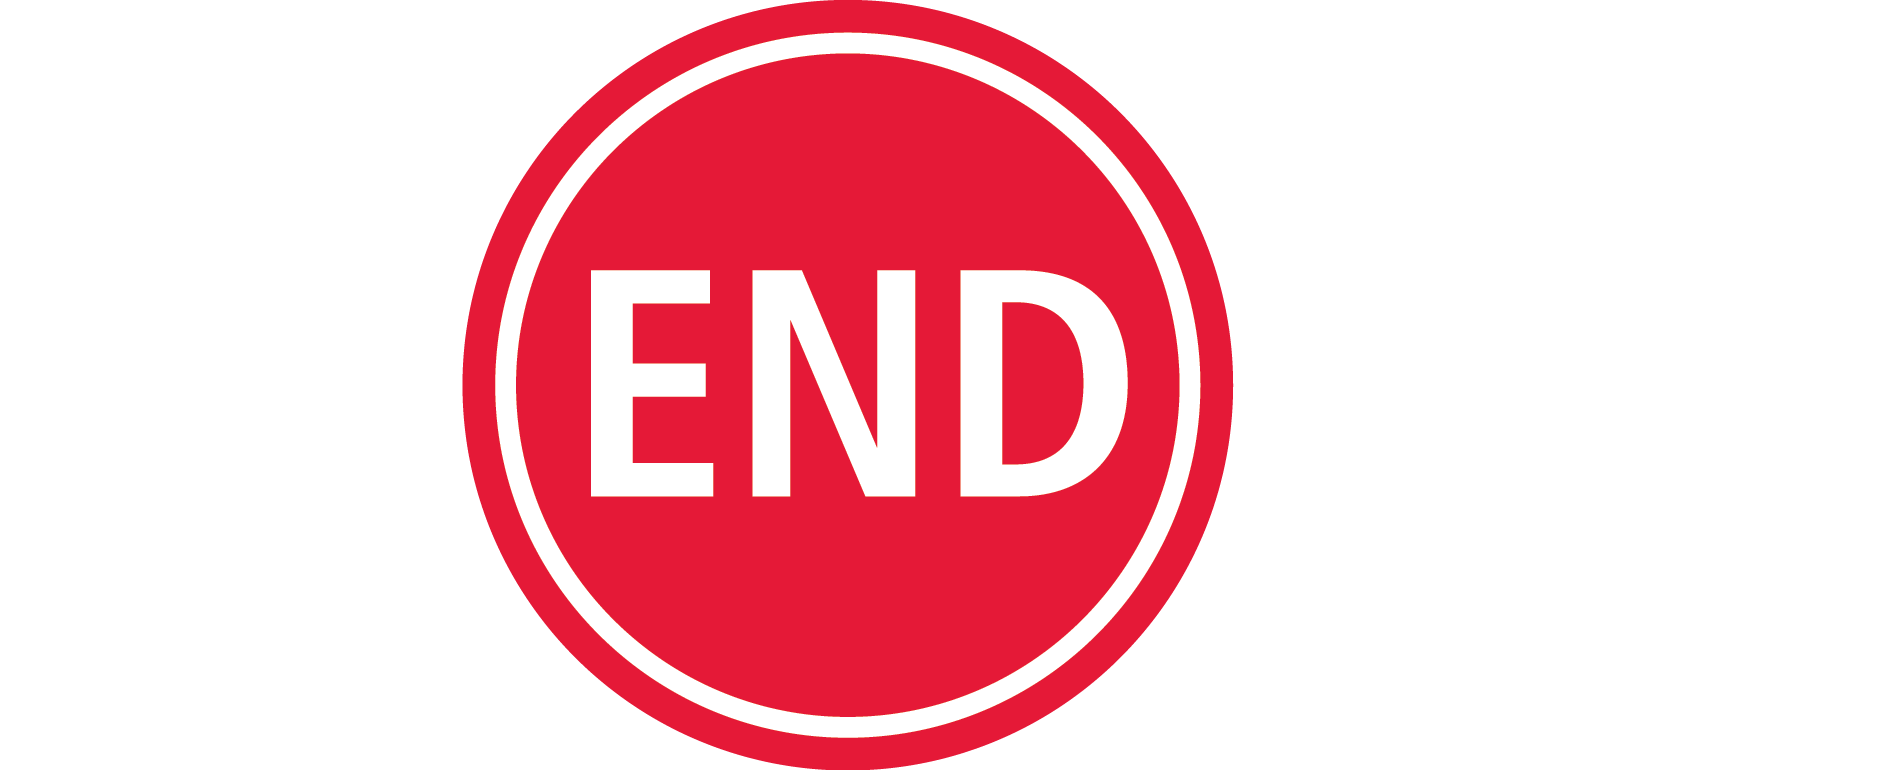 The END Fund